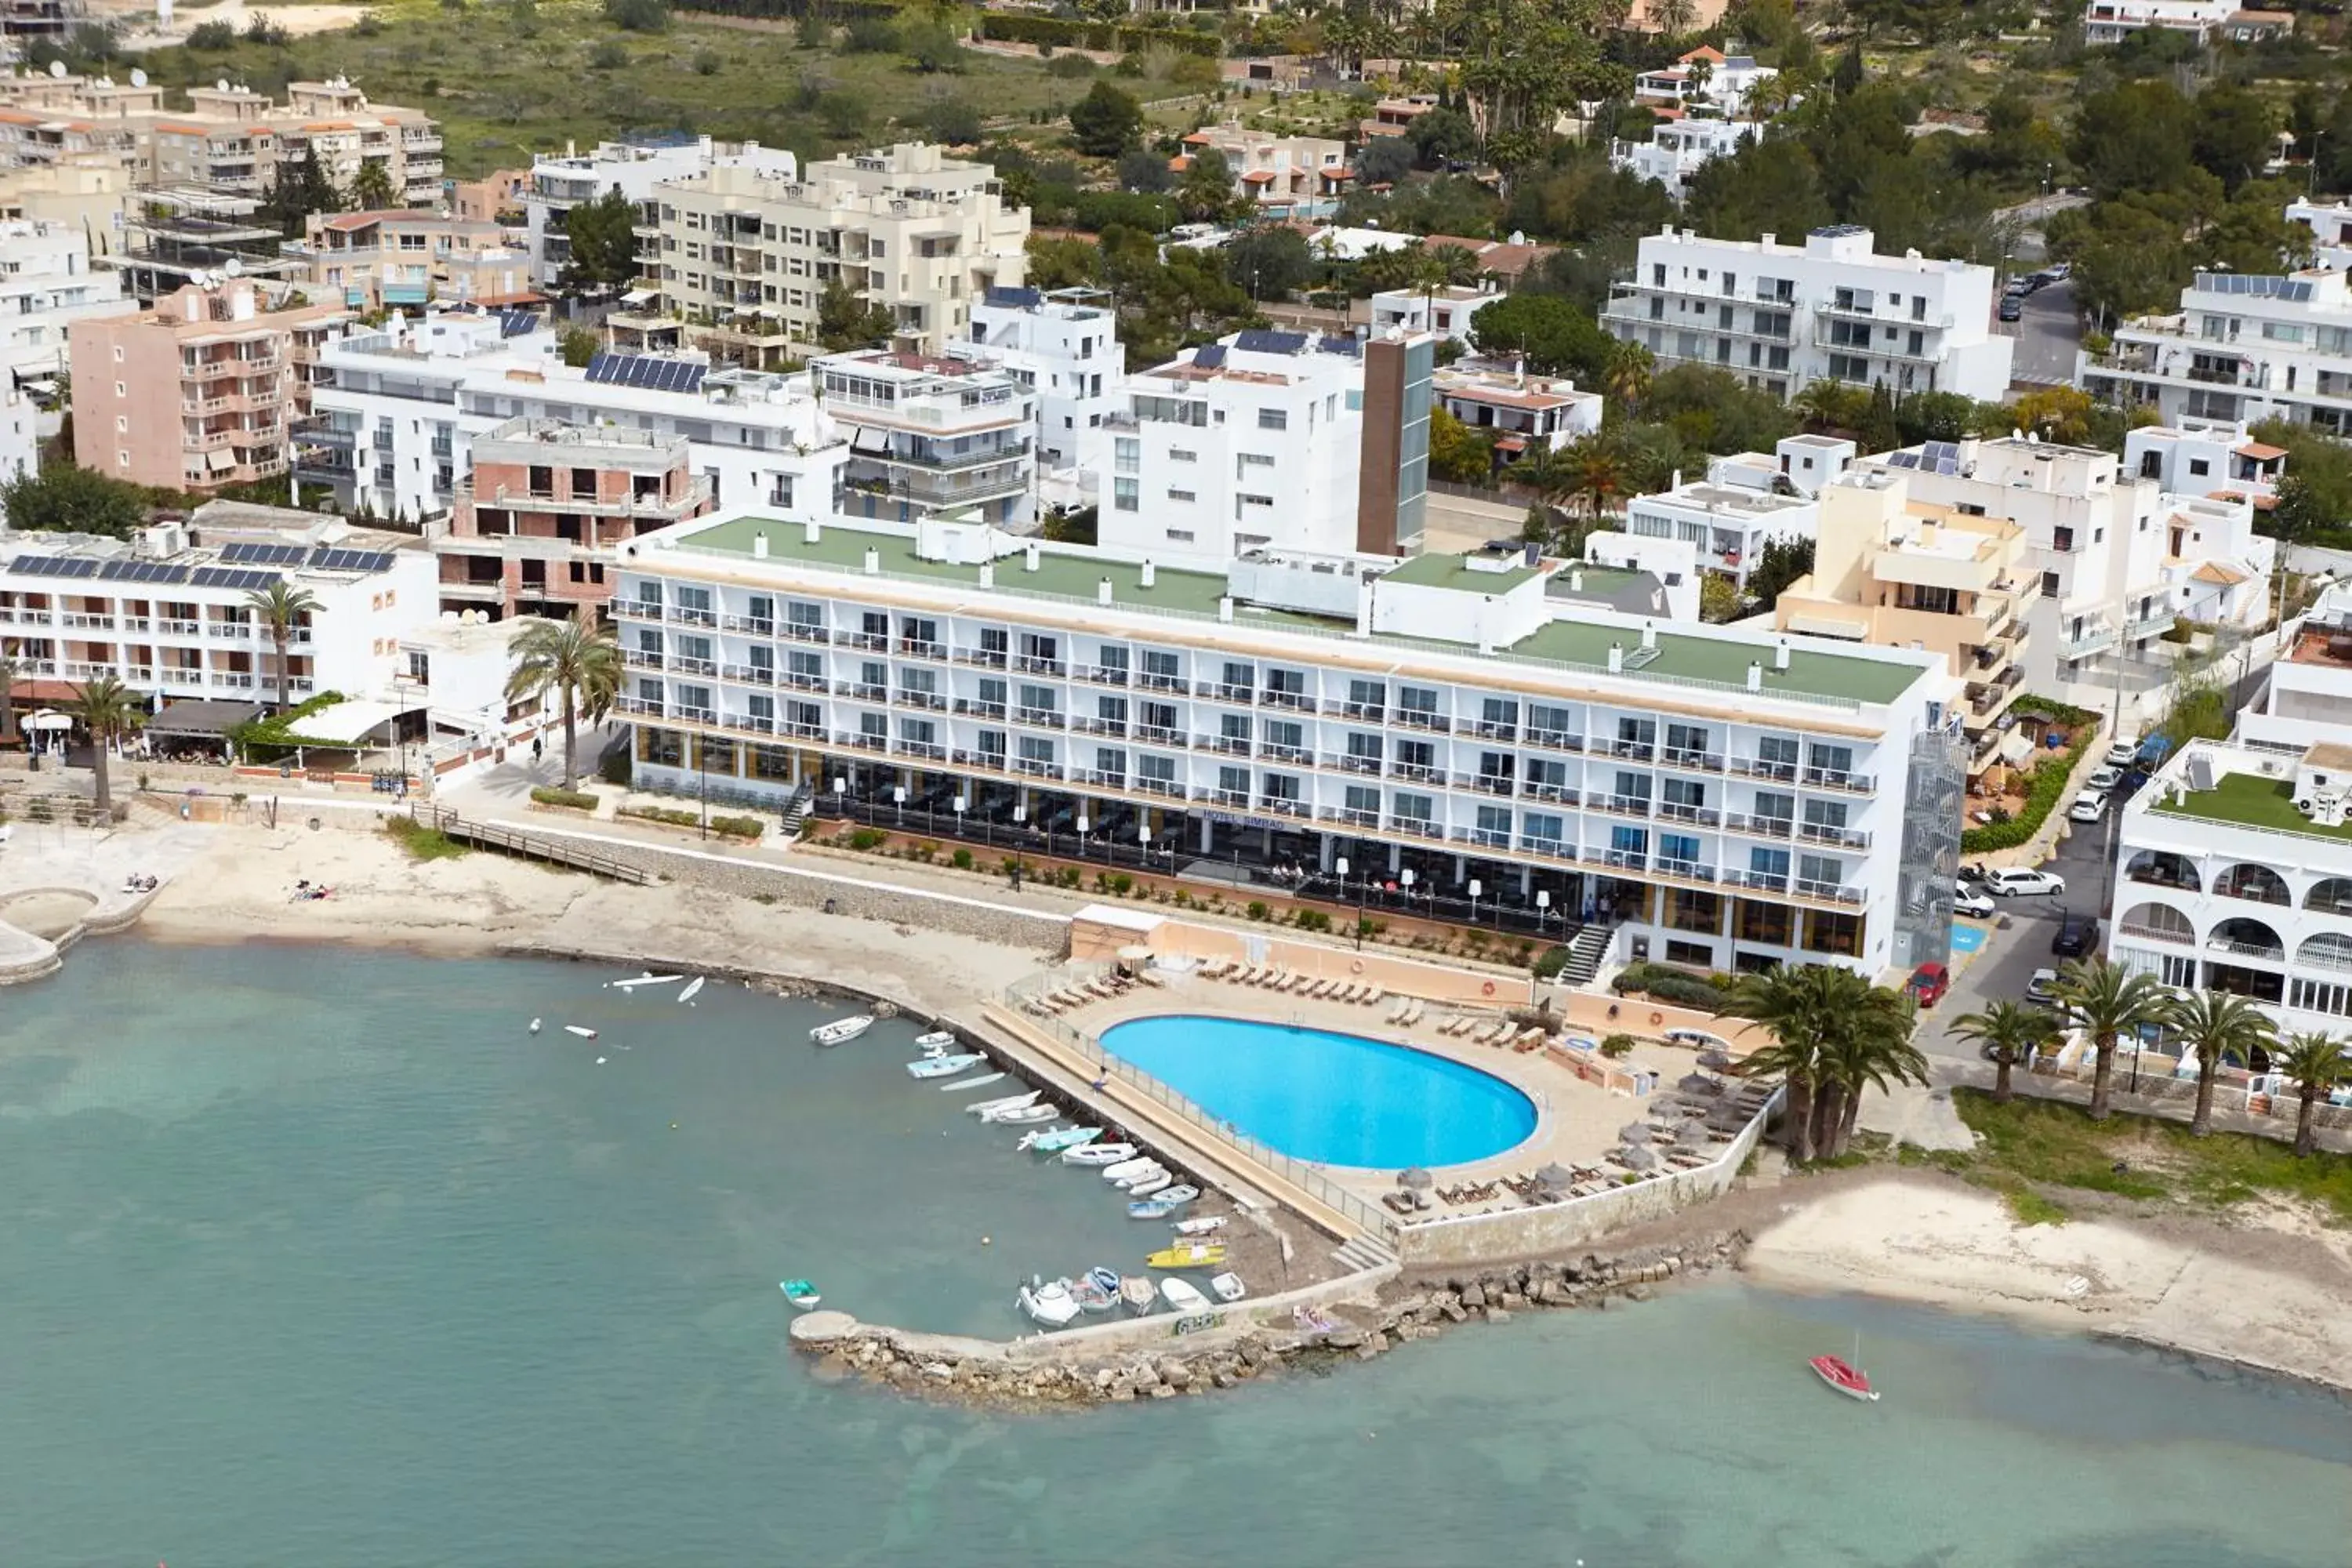 Off site, Bird's-eye View in Hotel Simbad Ibiza & Spa